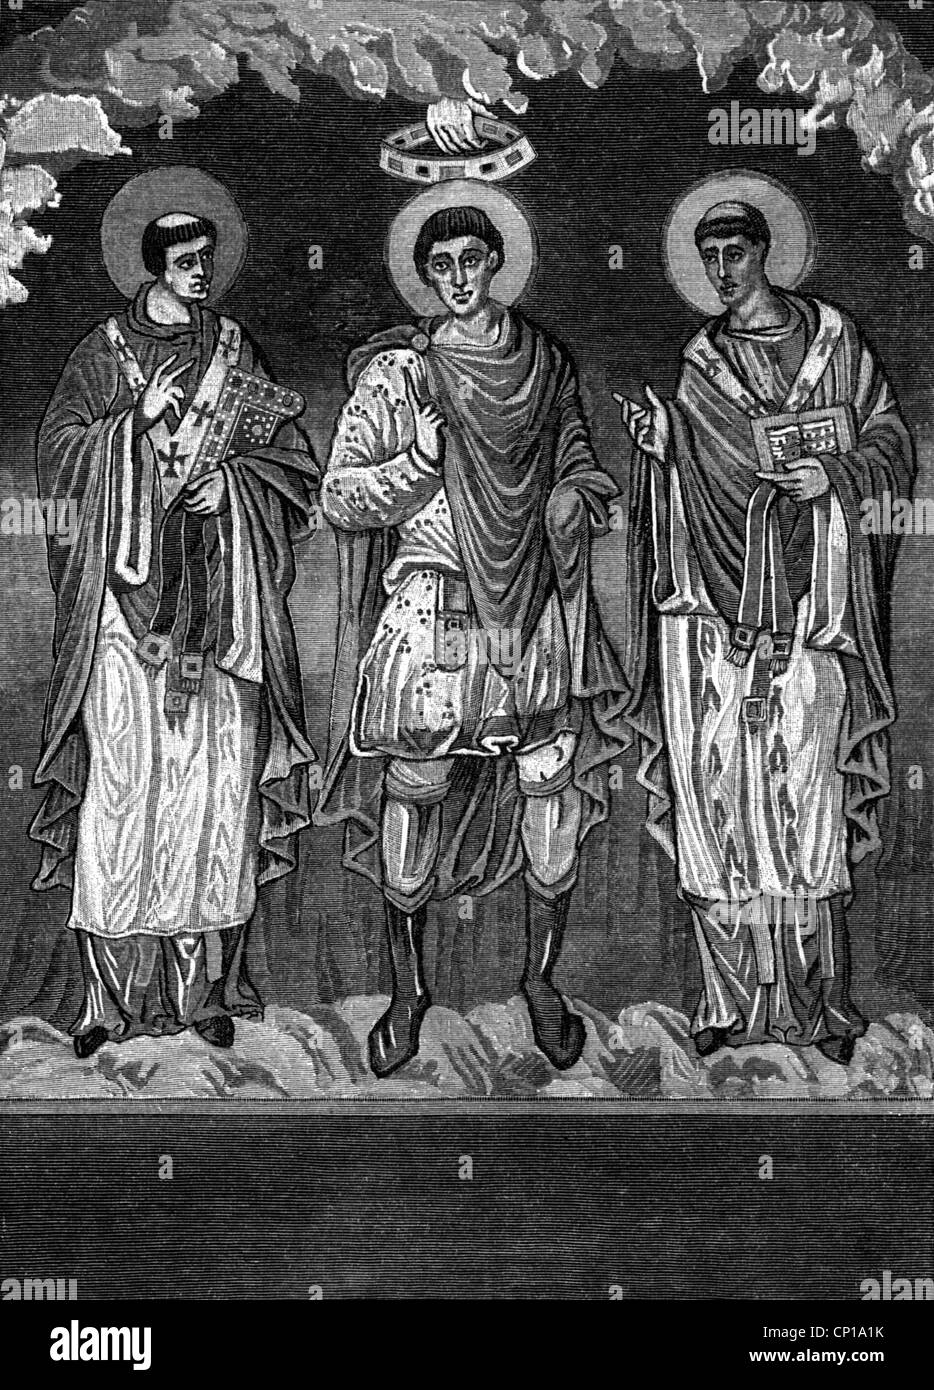 Middle Ages,Frankish Empire,Frankish count,standing between two bishops,after a miniature from the 9th century,wood engraving,treasure of the church of Metz,Paris national library,Canon of the Mass,hand of god,power of god,corona,coronas,king,kings,book,books,hold,holding,tunicle,chasuble,religion,religions,count,earl,counts,earls,miniature,miniatures,Frankish Empire,potentate,monarch,monarchs,ruler,rulers,sovereign,sovereigns,regent,regents,lord,historic,historical,book-painting,book painting,illuminated manuscript,,Additional-Rights-Clearences-Not Available Stock Photo